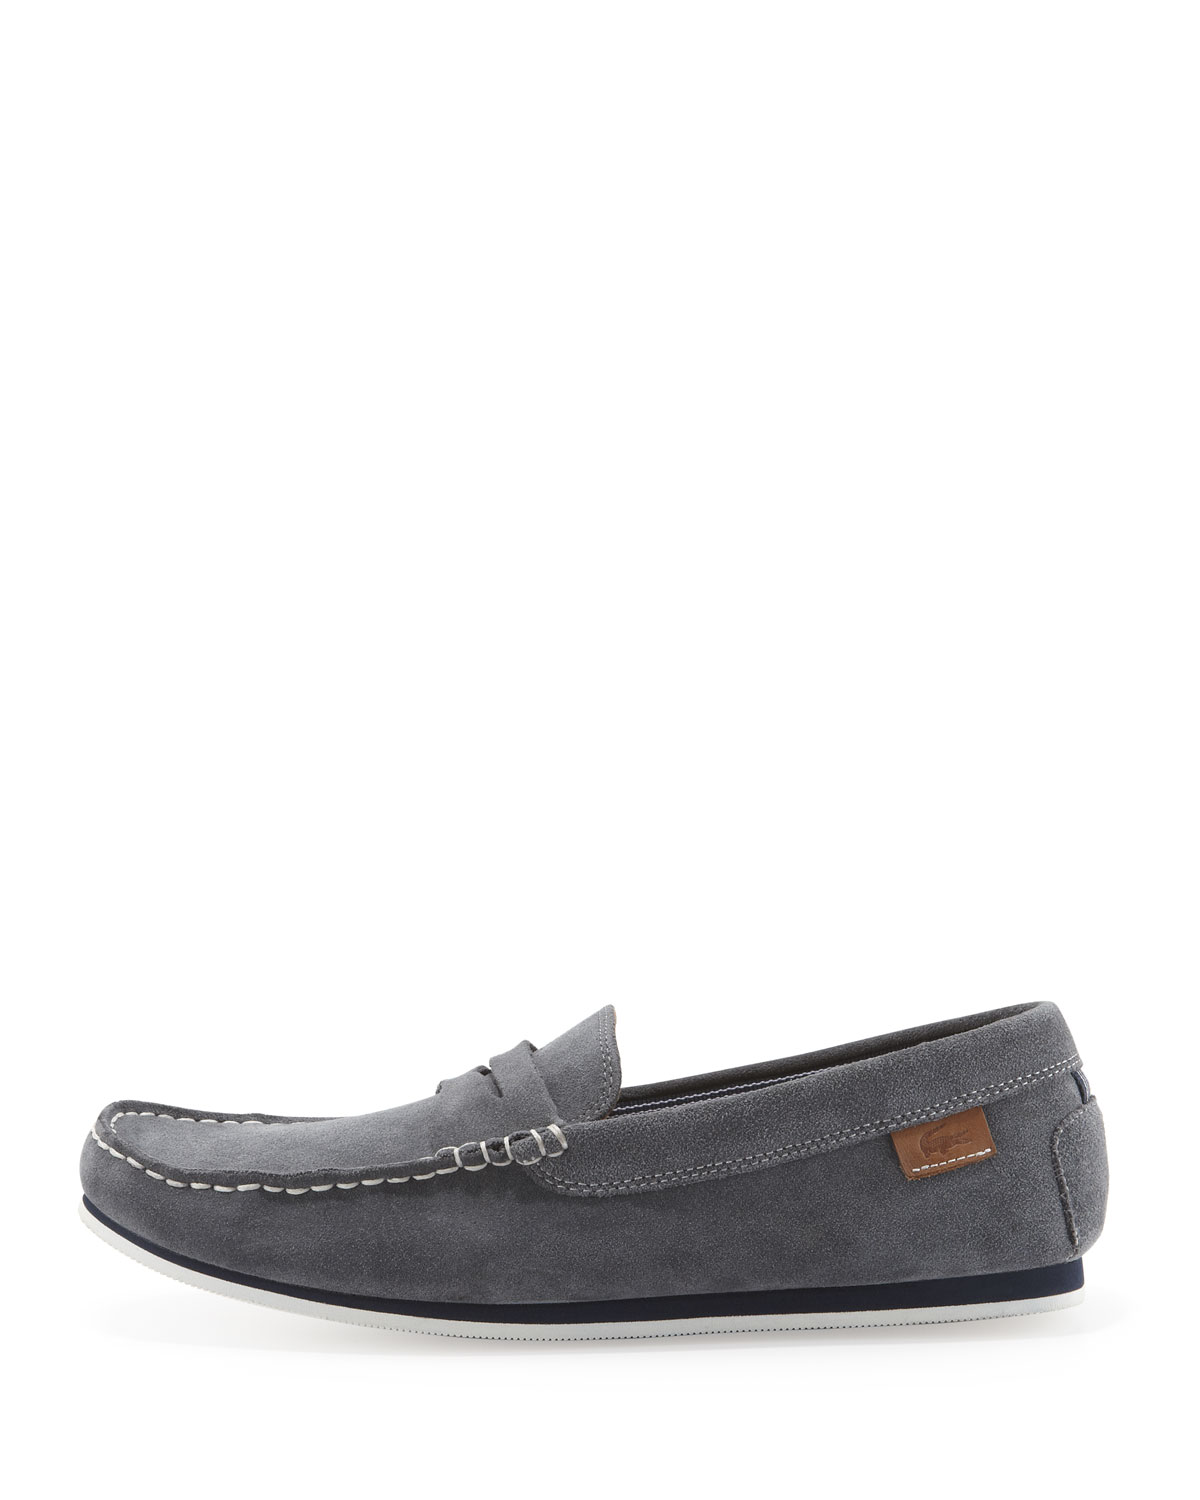 Lyst - Lacoste Suede Penny Loafer Gray in Gray for Men